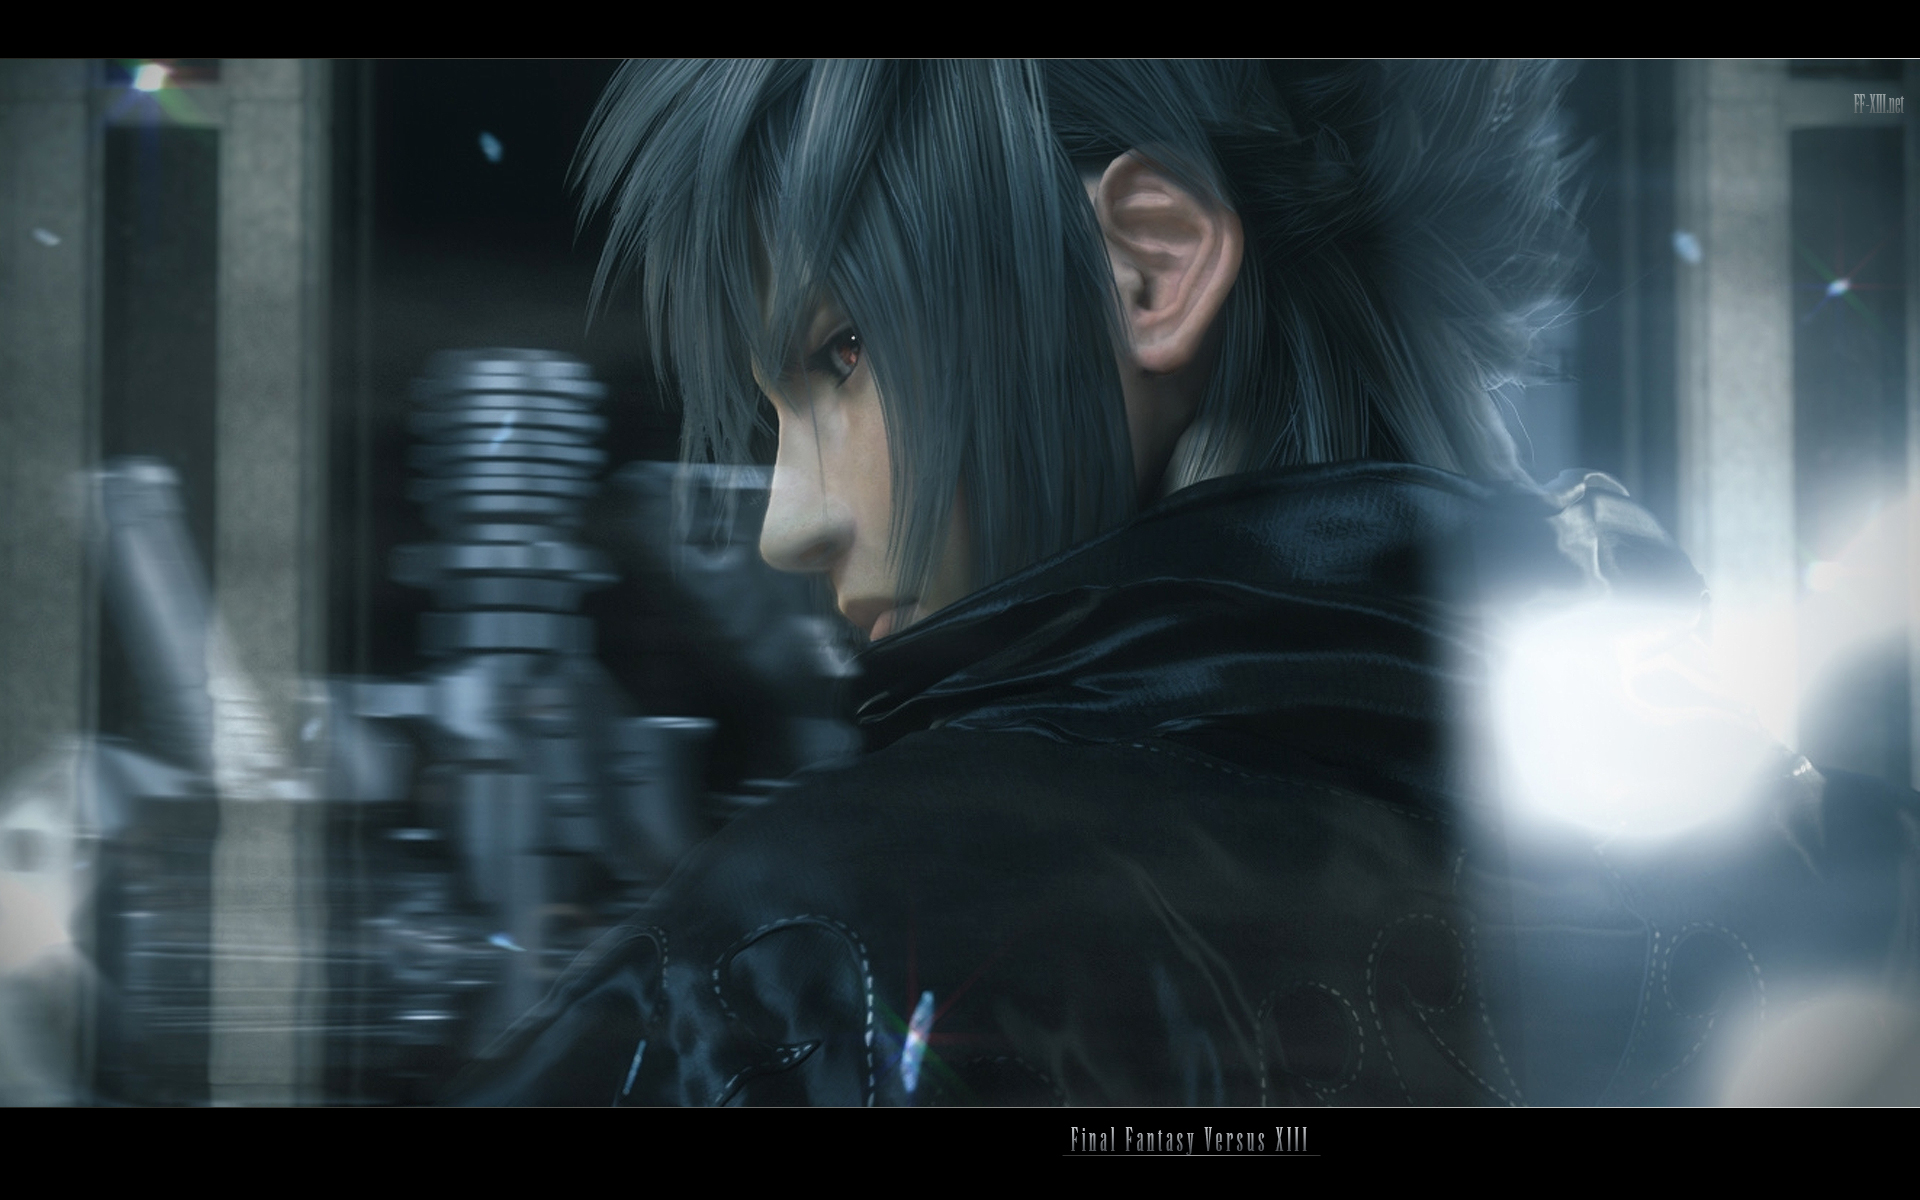 Free Download Final Fantasy Xv Wallpapers Final Fantasy Fxn Network 19x10 For Your Desktop Mobile Tablet Explore 43 Final Fantasy Live Wallpaper Fantasy Hd Wallpaper Fantasy Wallpapers And Backgrounds